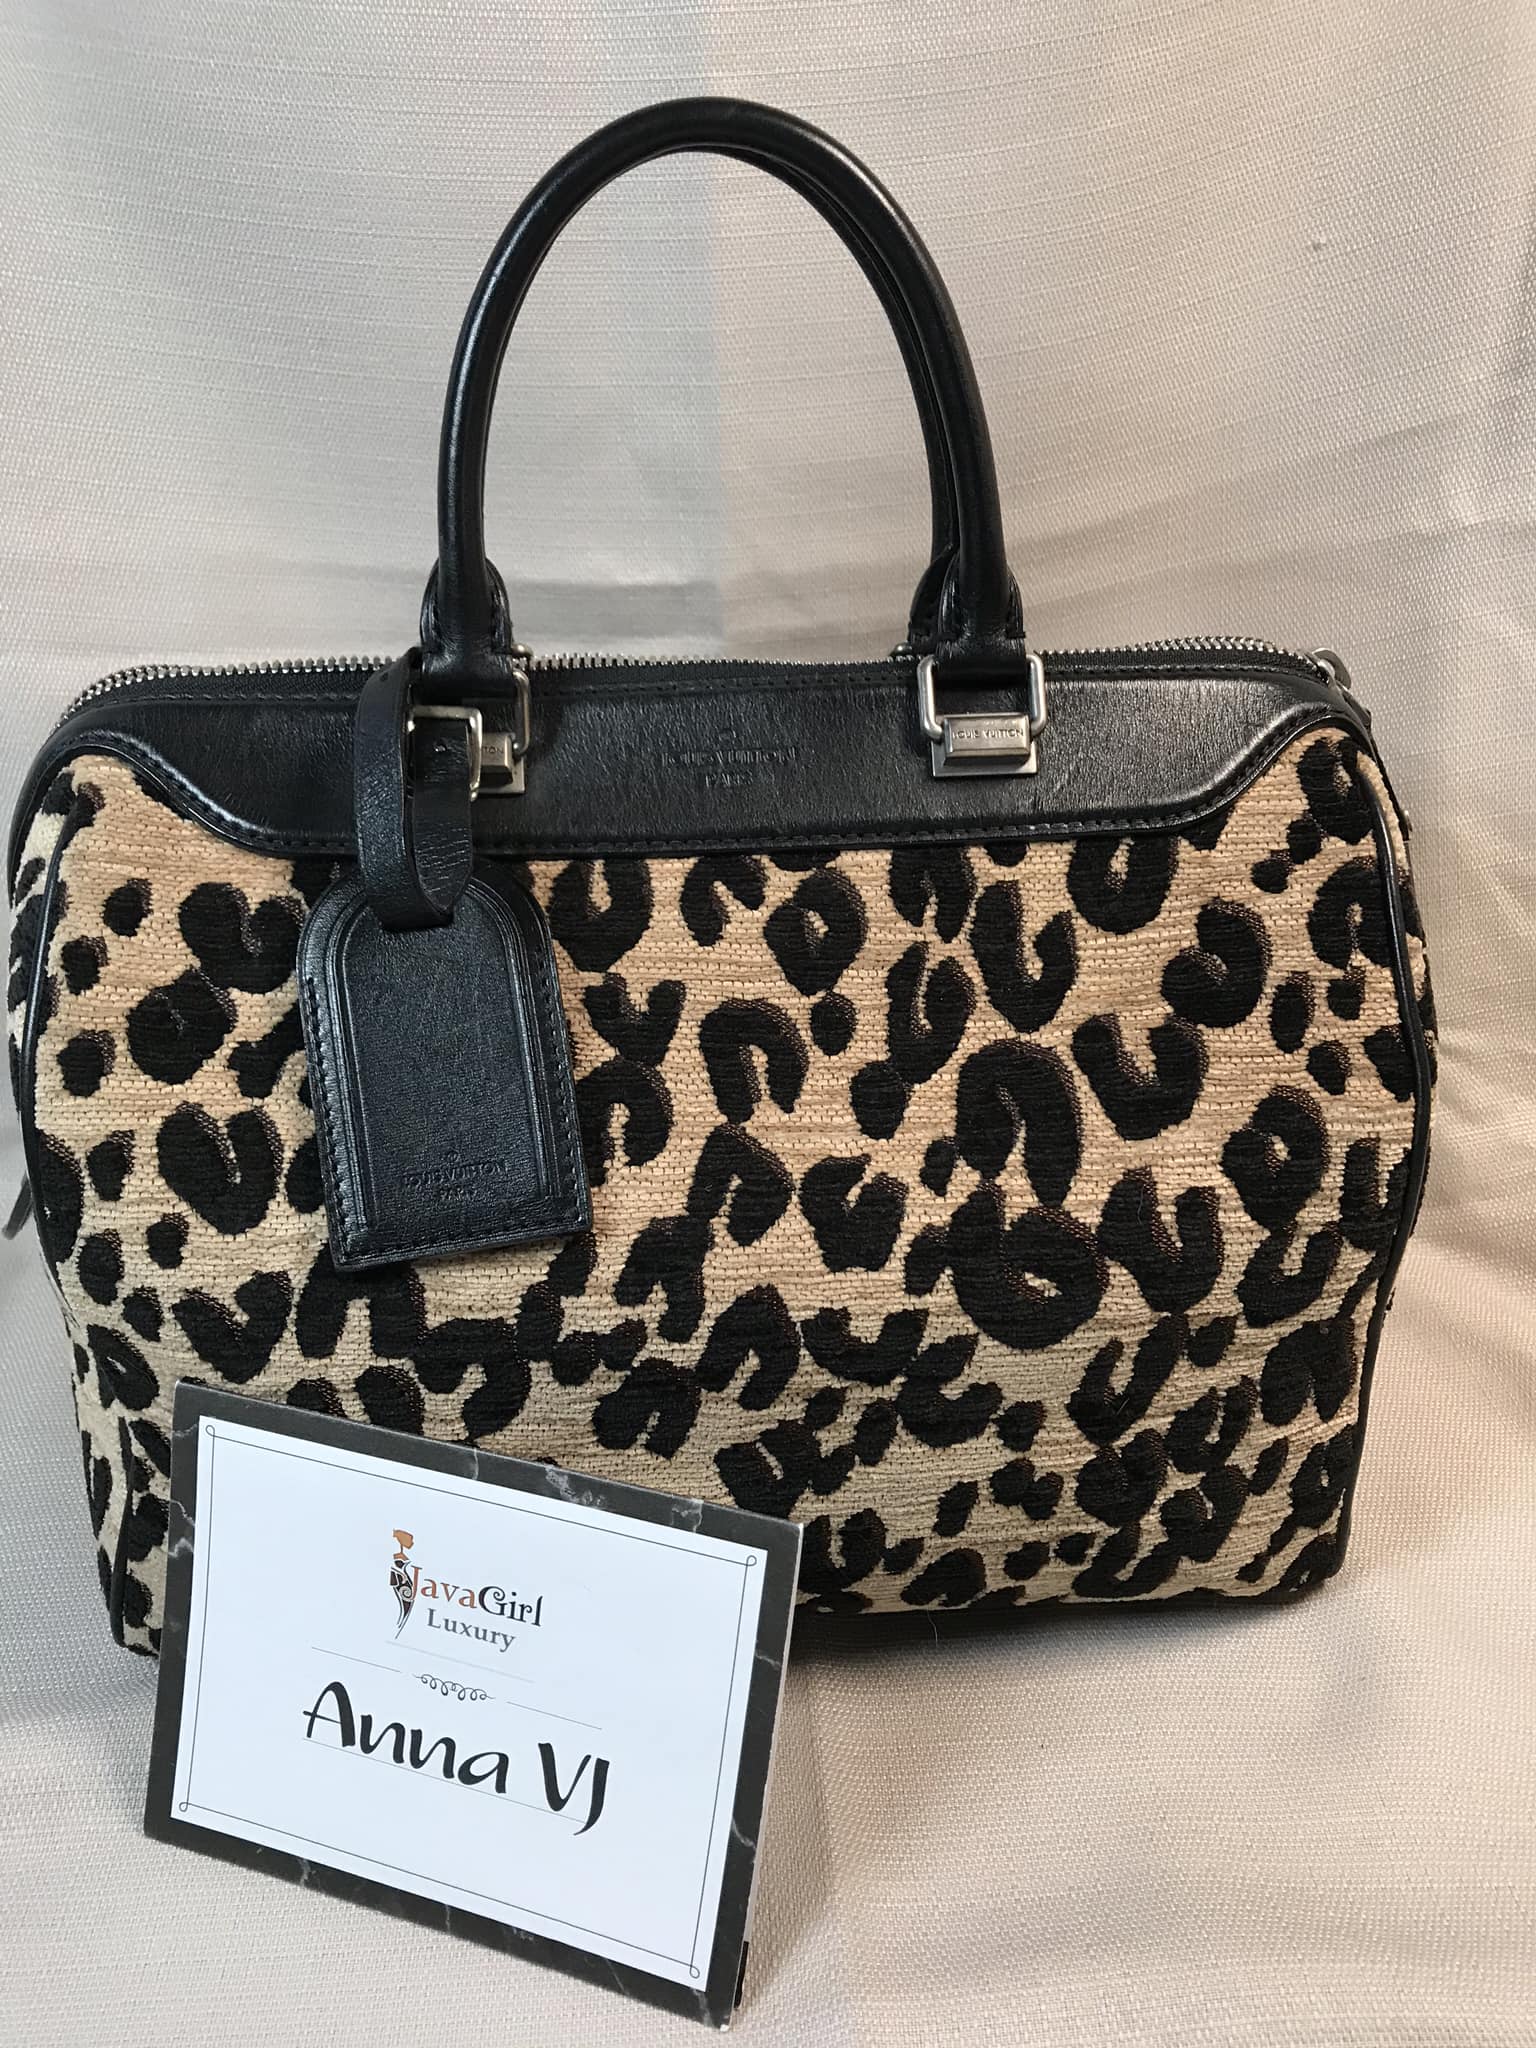 78 - A LIMITED EDITION STEPHEN SPROUSE LEOPARD PRINT CANVAS SPEEDY